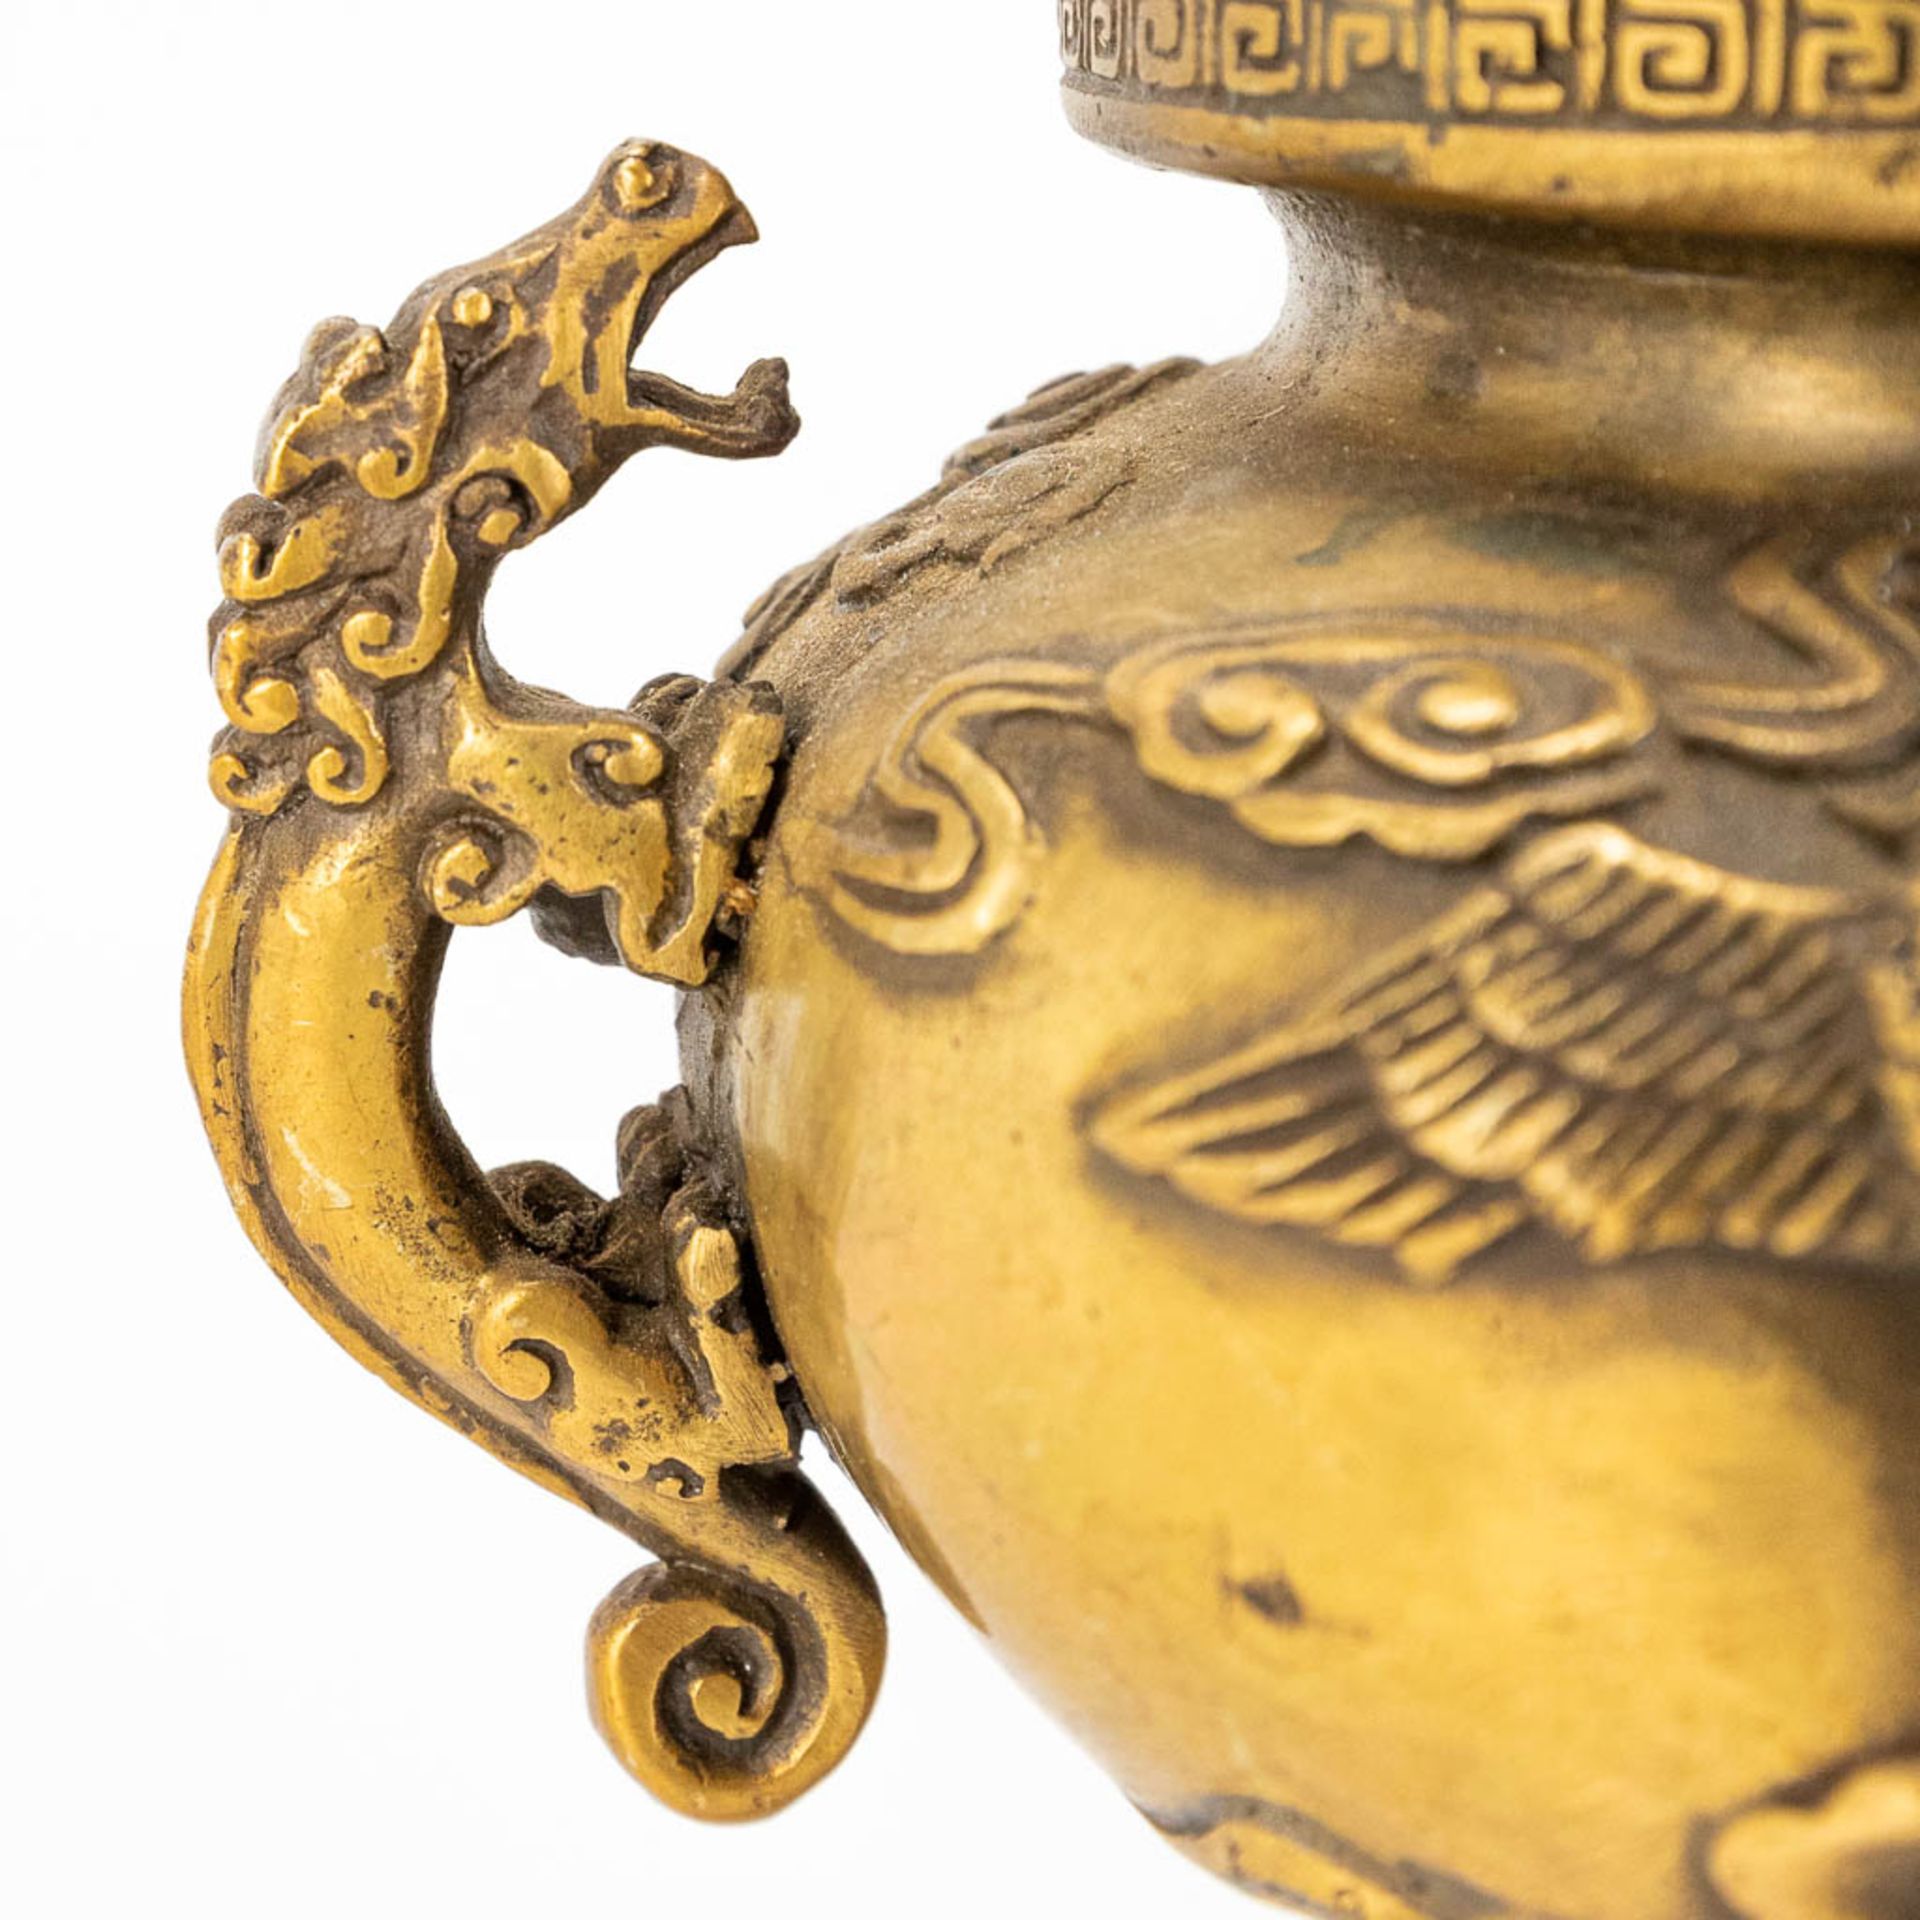 A bronze Koro Brule Parfum, decorated with dragons. - Image 8 of 12